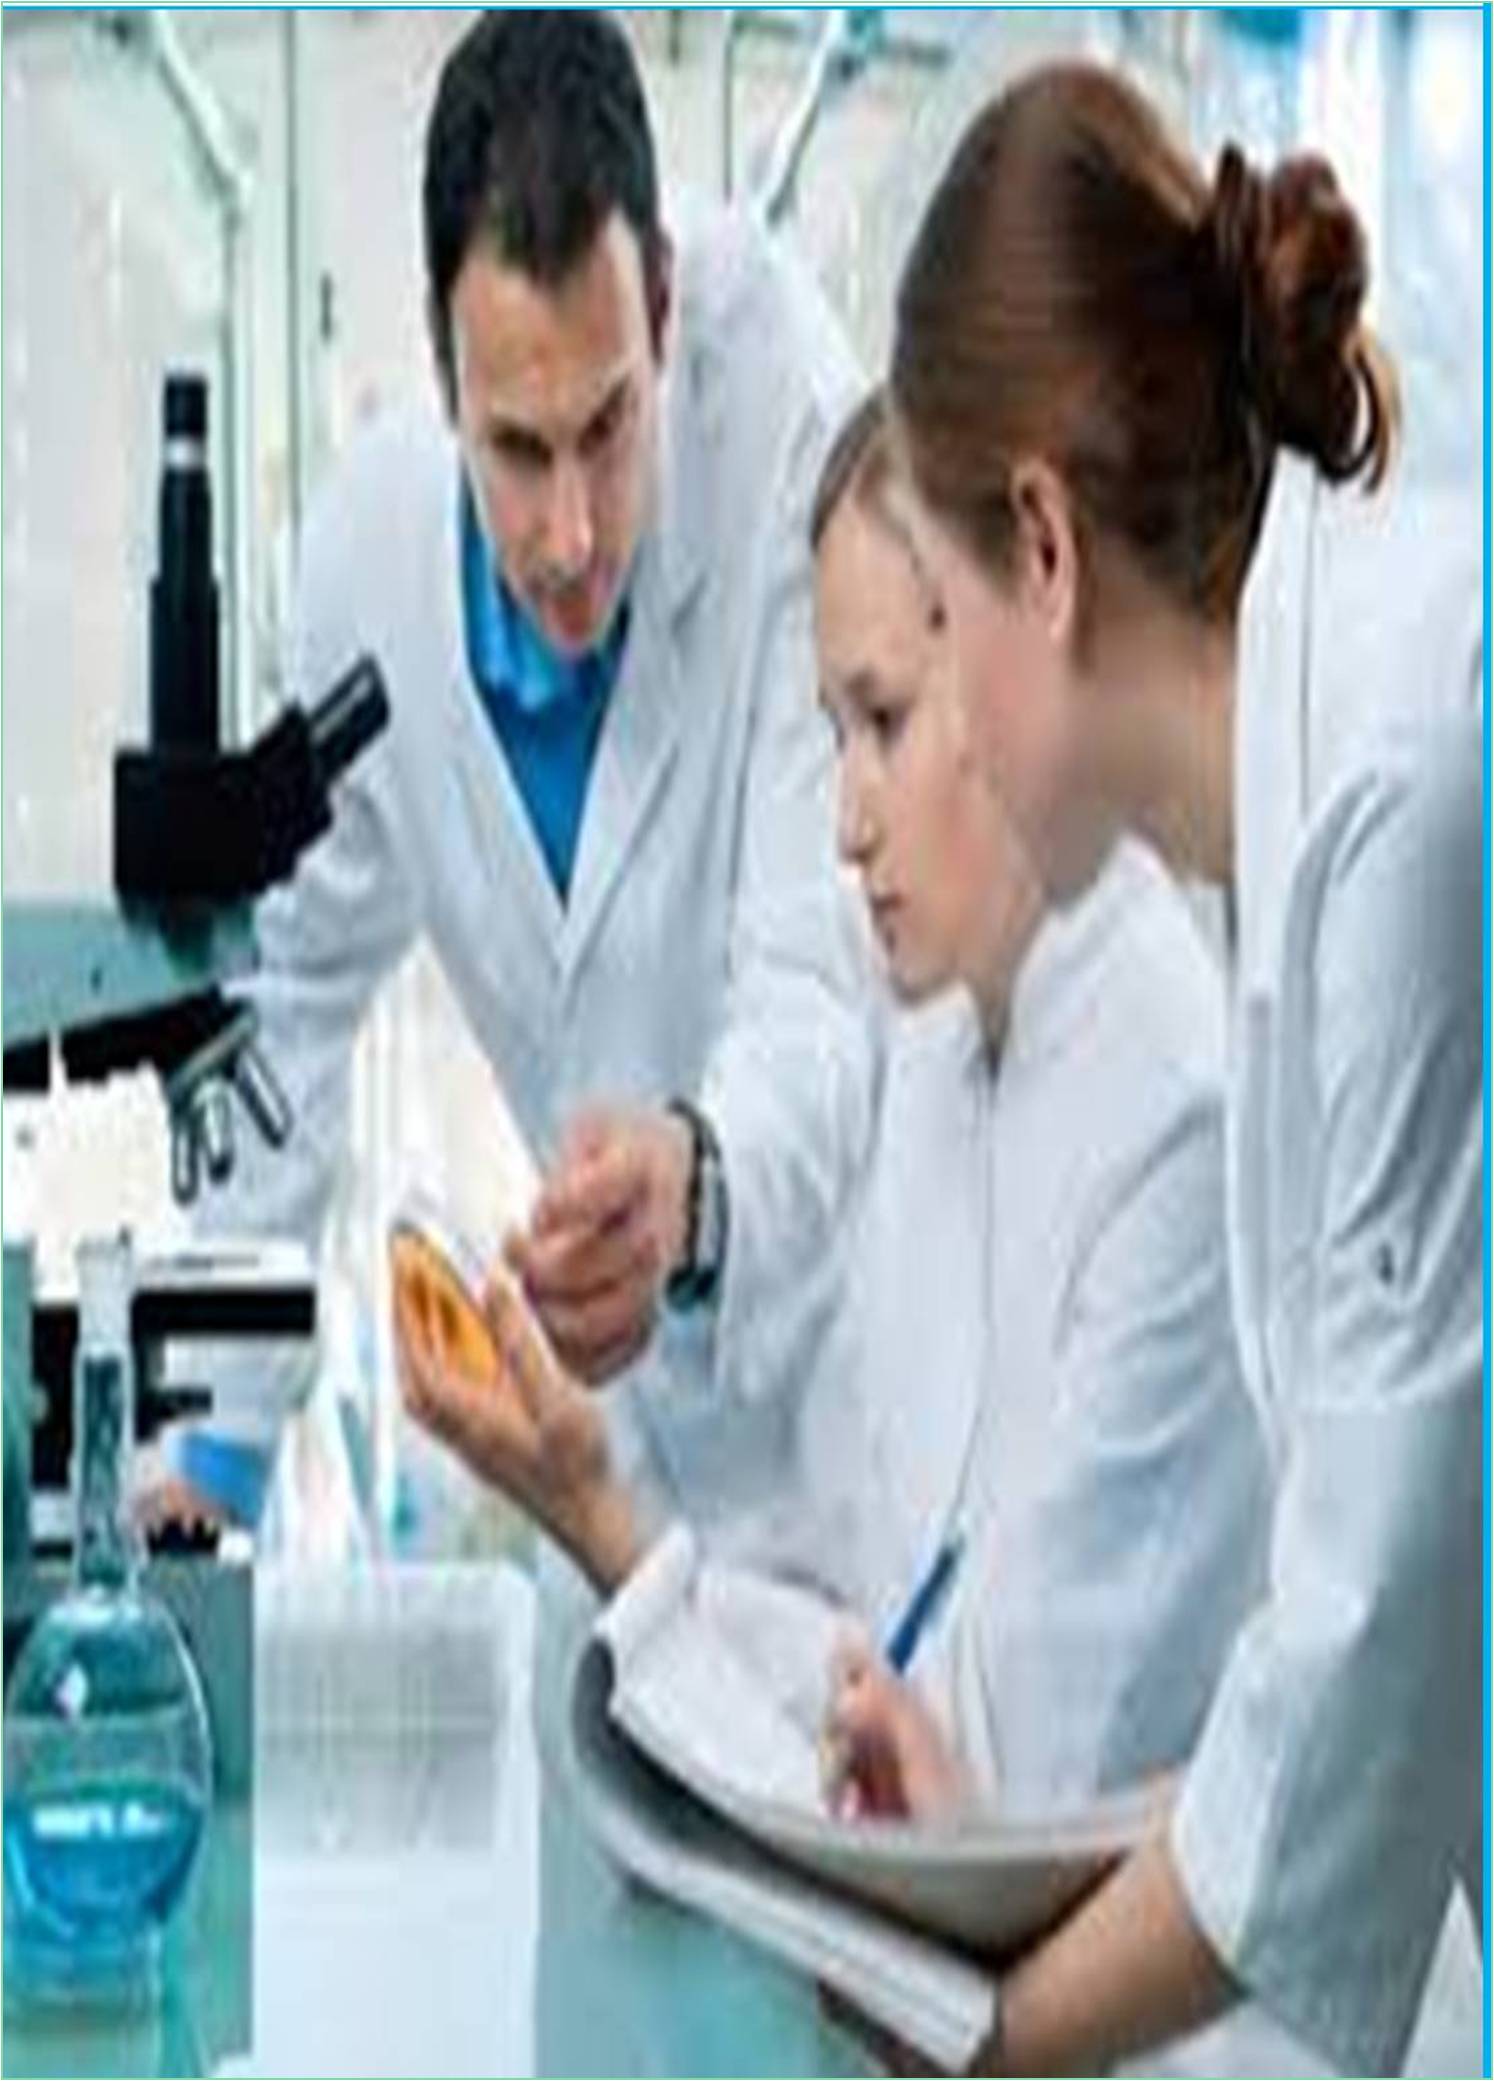 global-journal-of-biological-and-biomedical-research-banner.jpg